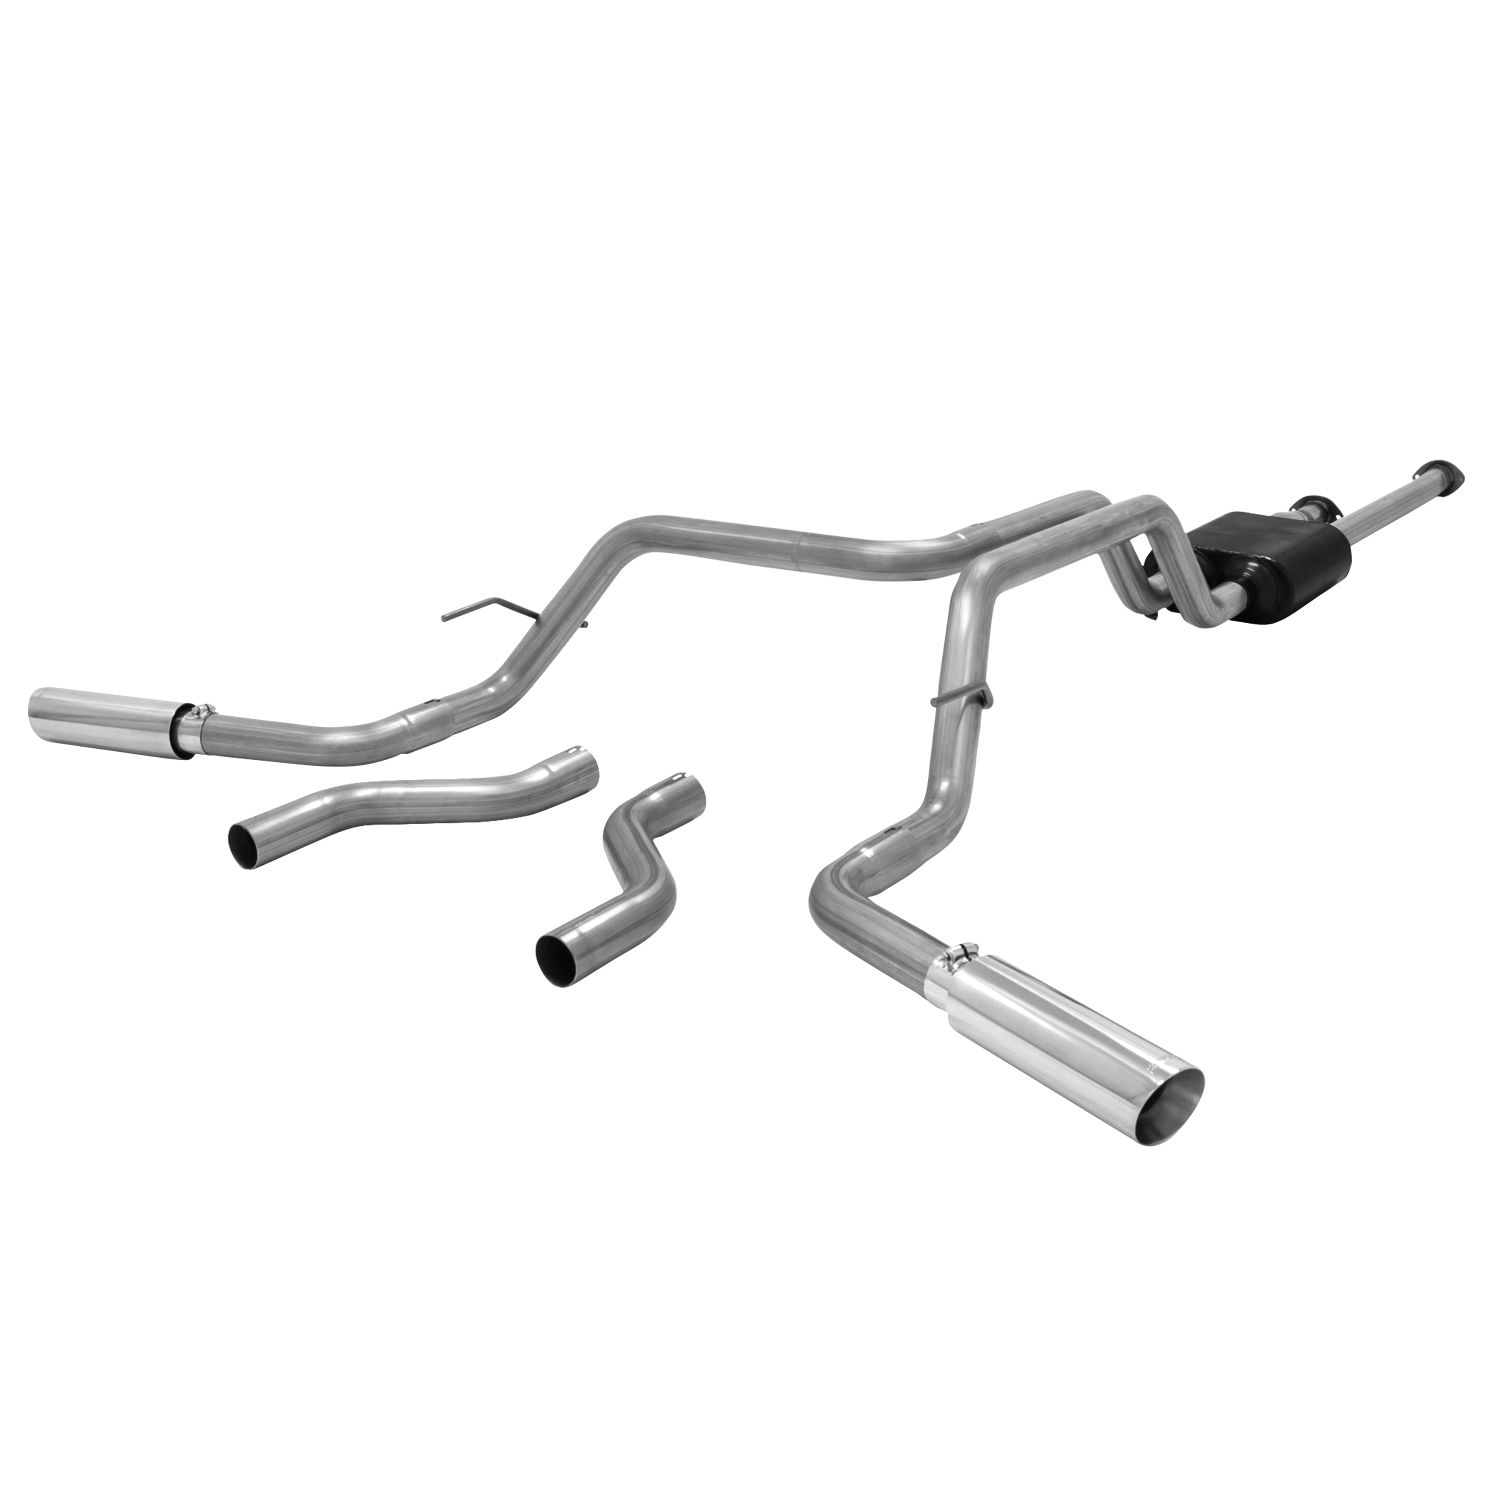 2017 Toyota Tundra TRD Pro 5.7L Flowmaster American Thunder Cat-Back Exhaust - 817664